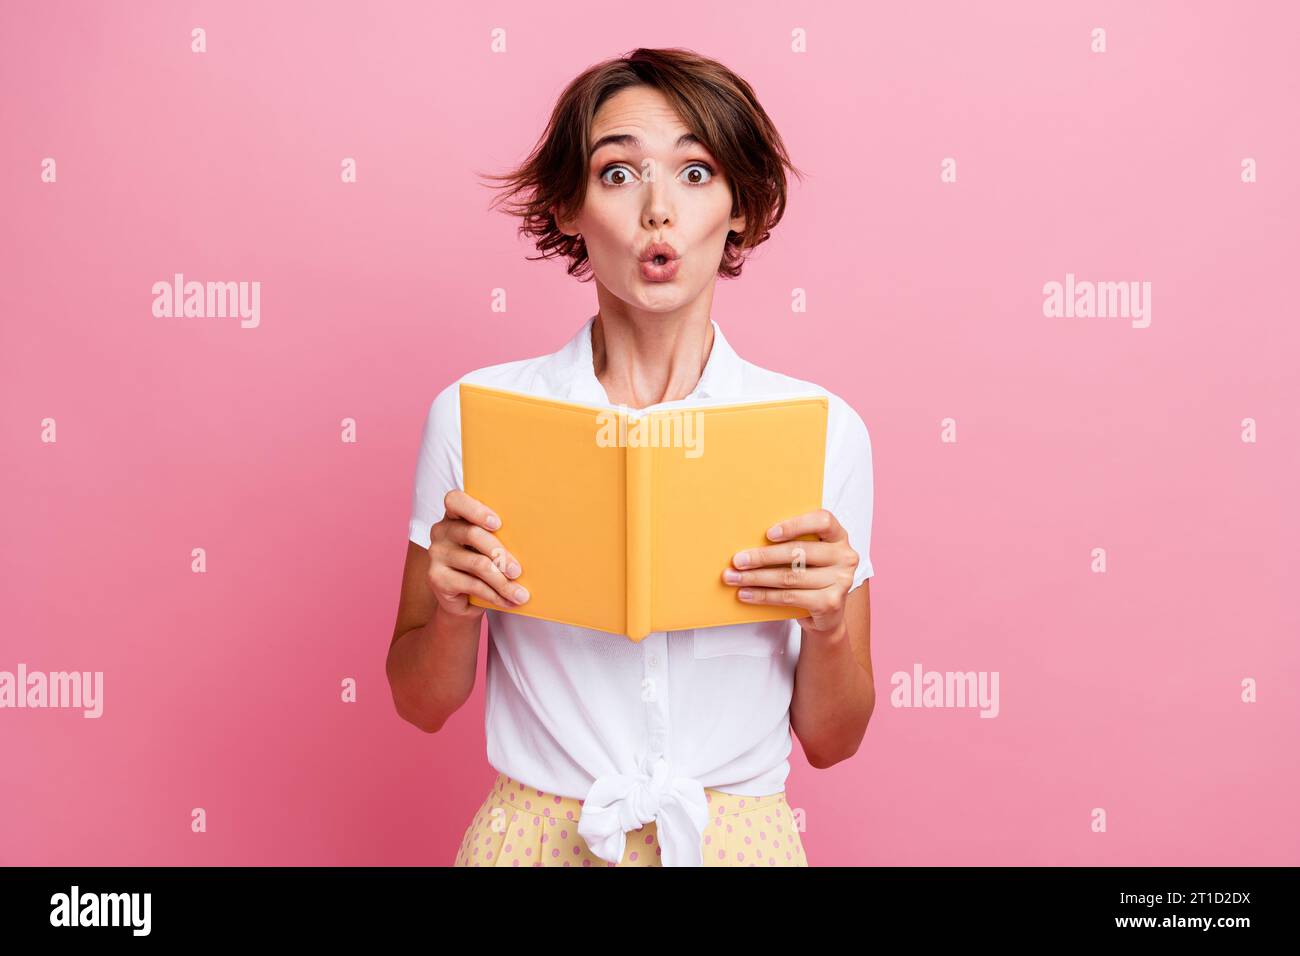 Funny impressionable young girl photo student reading new encyclopedia book surprised about world news isolated on pink color background Stock Photo